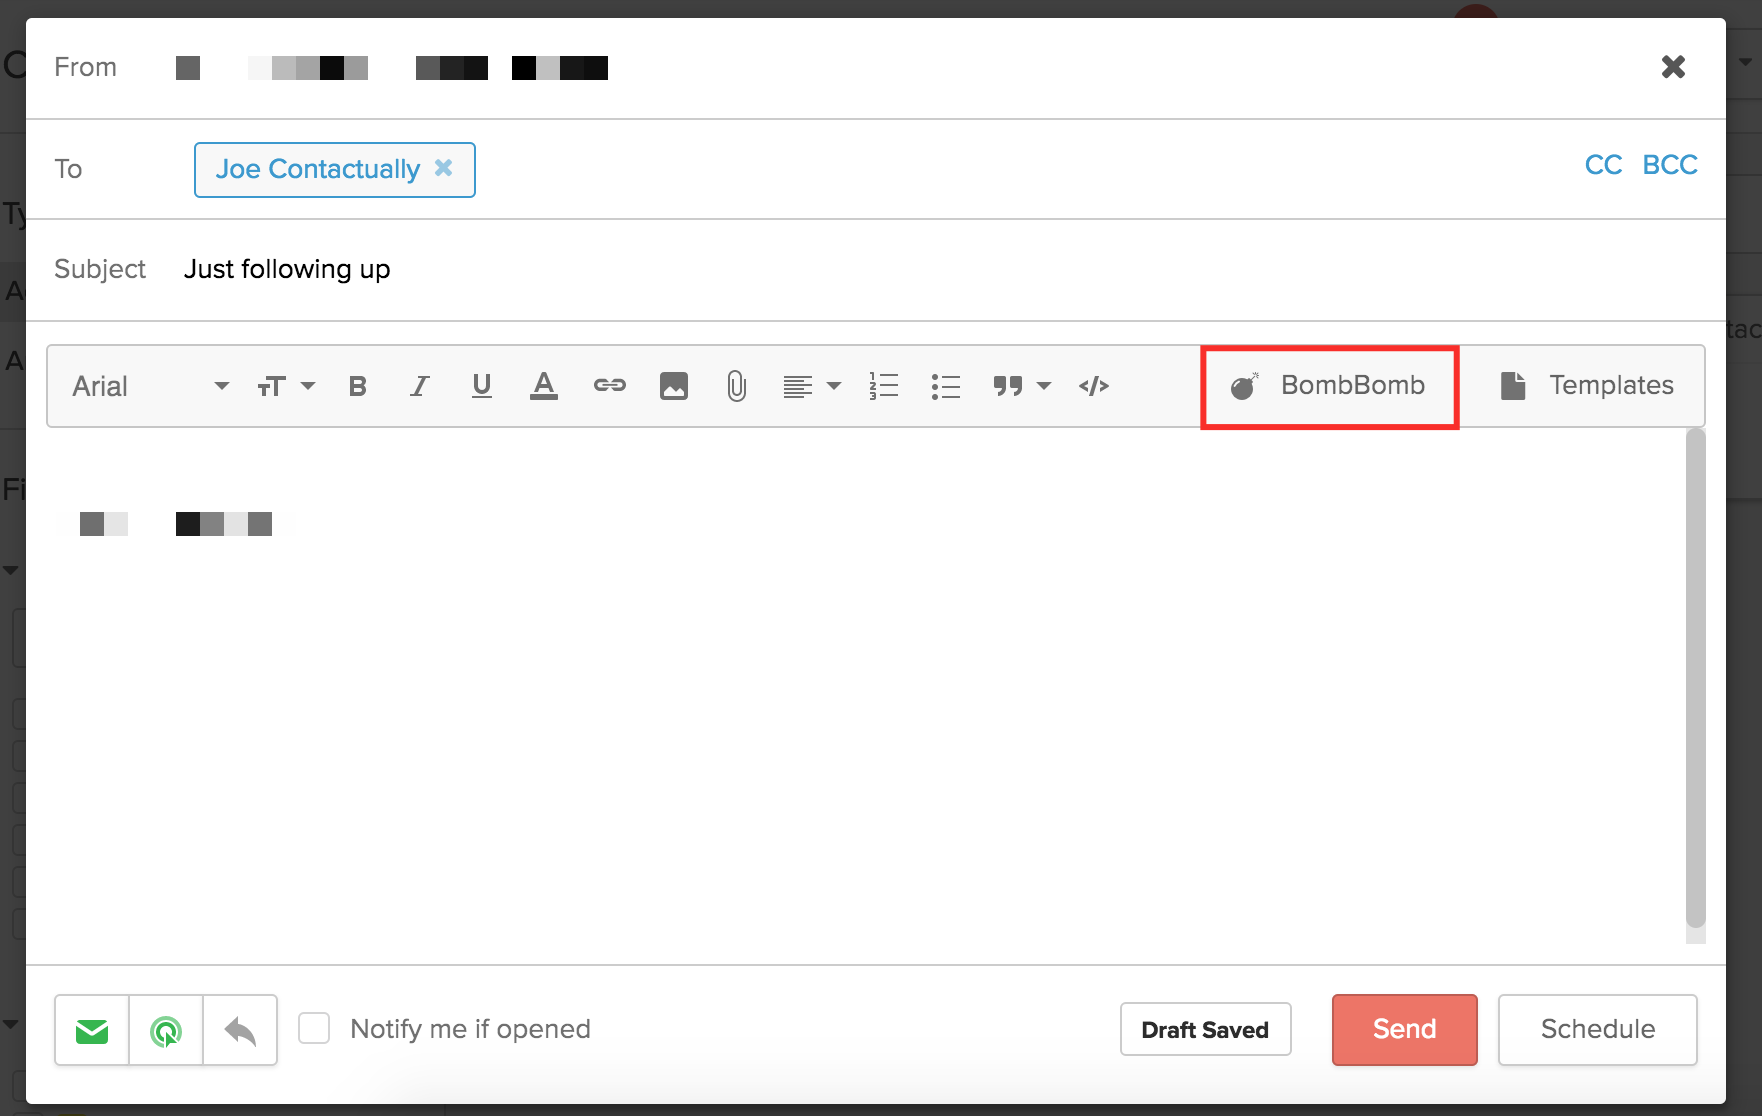 Recording your message in Contactually